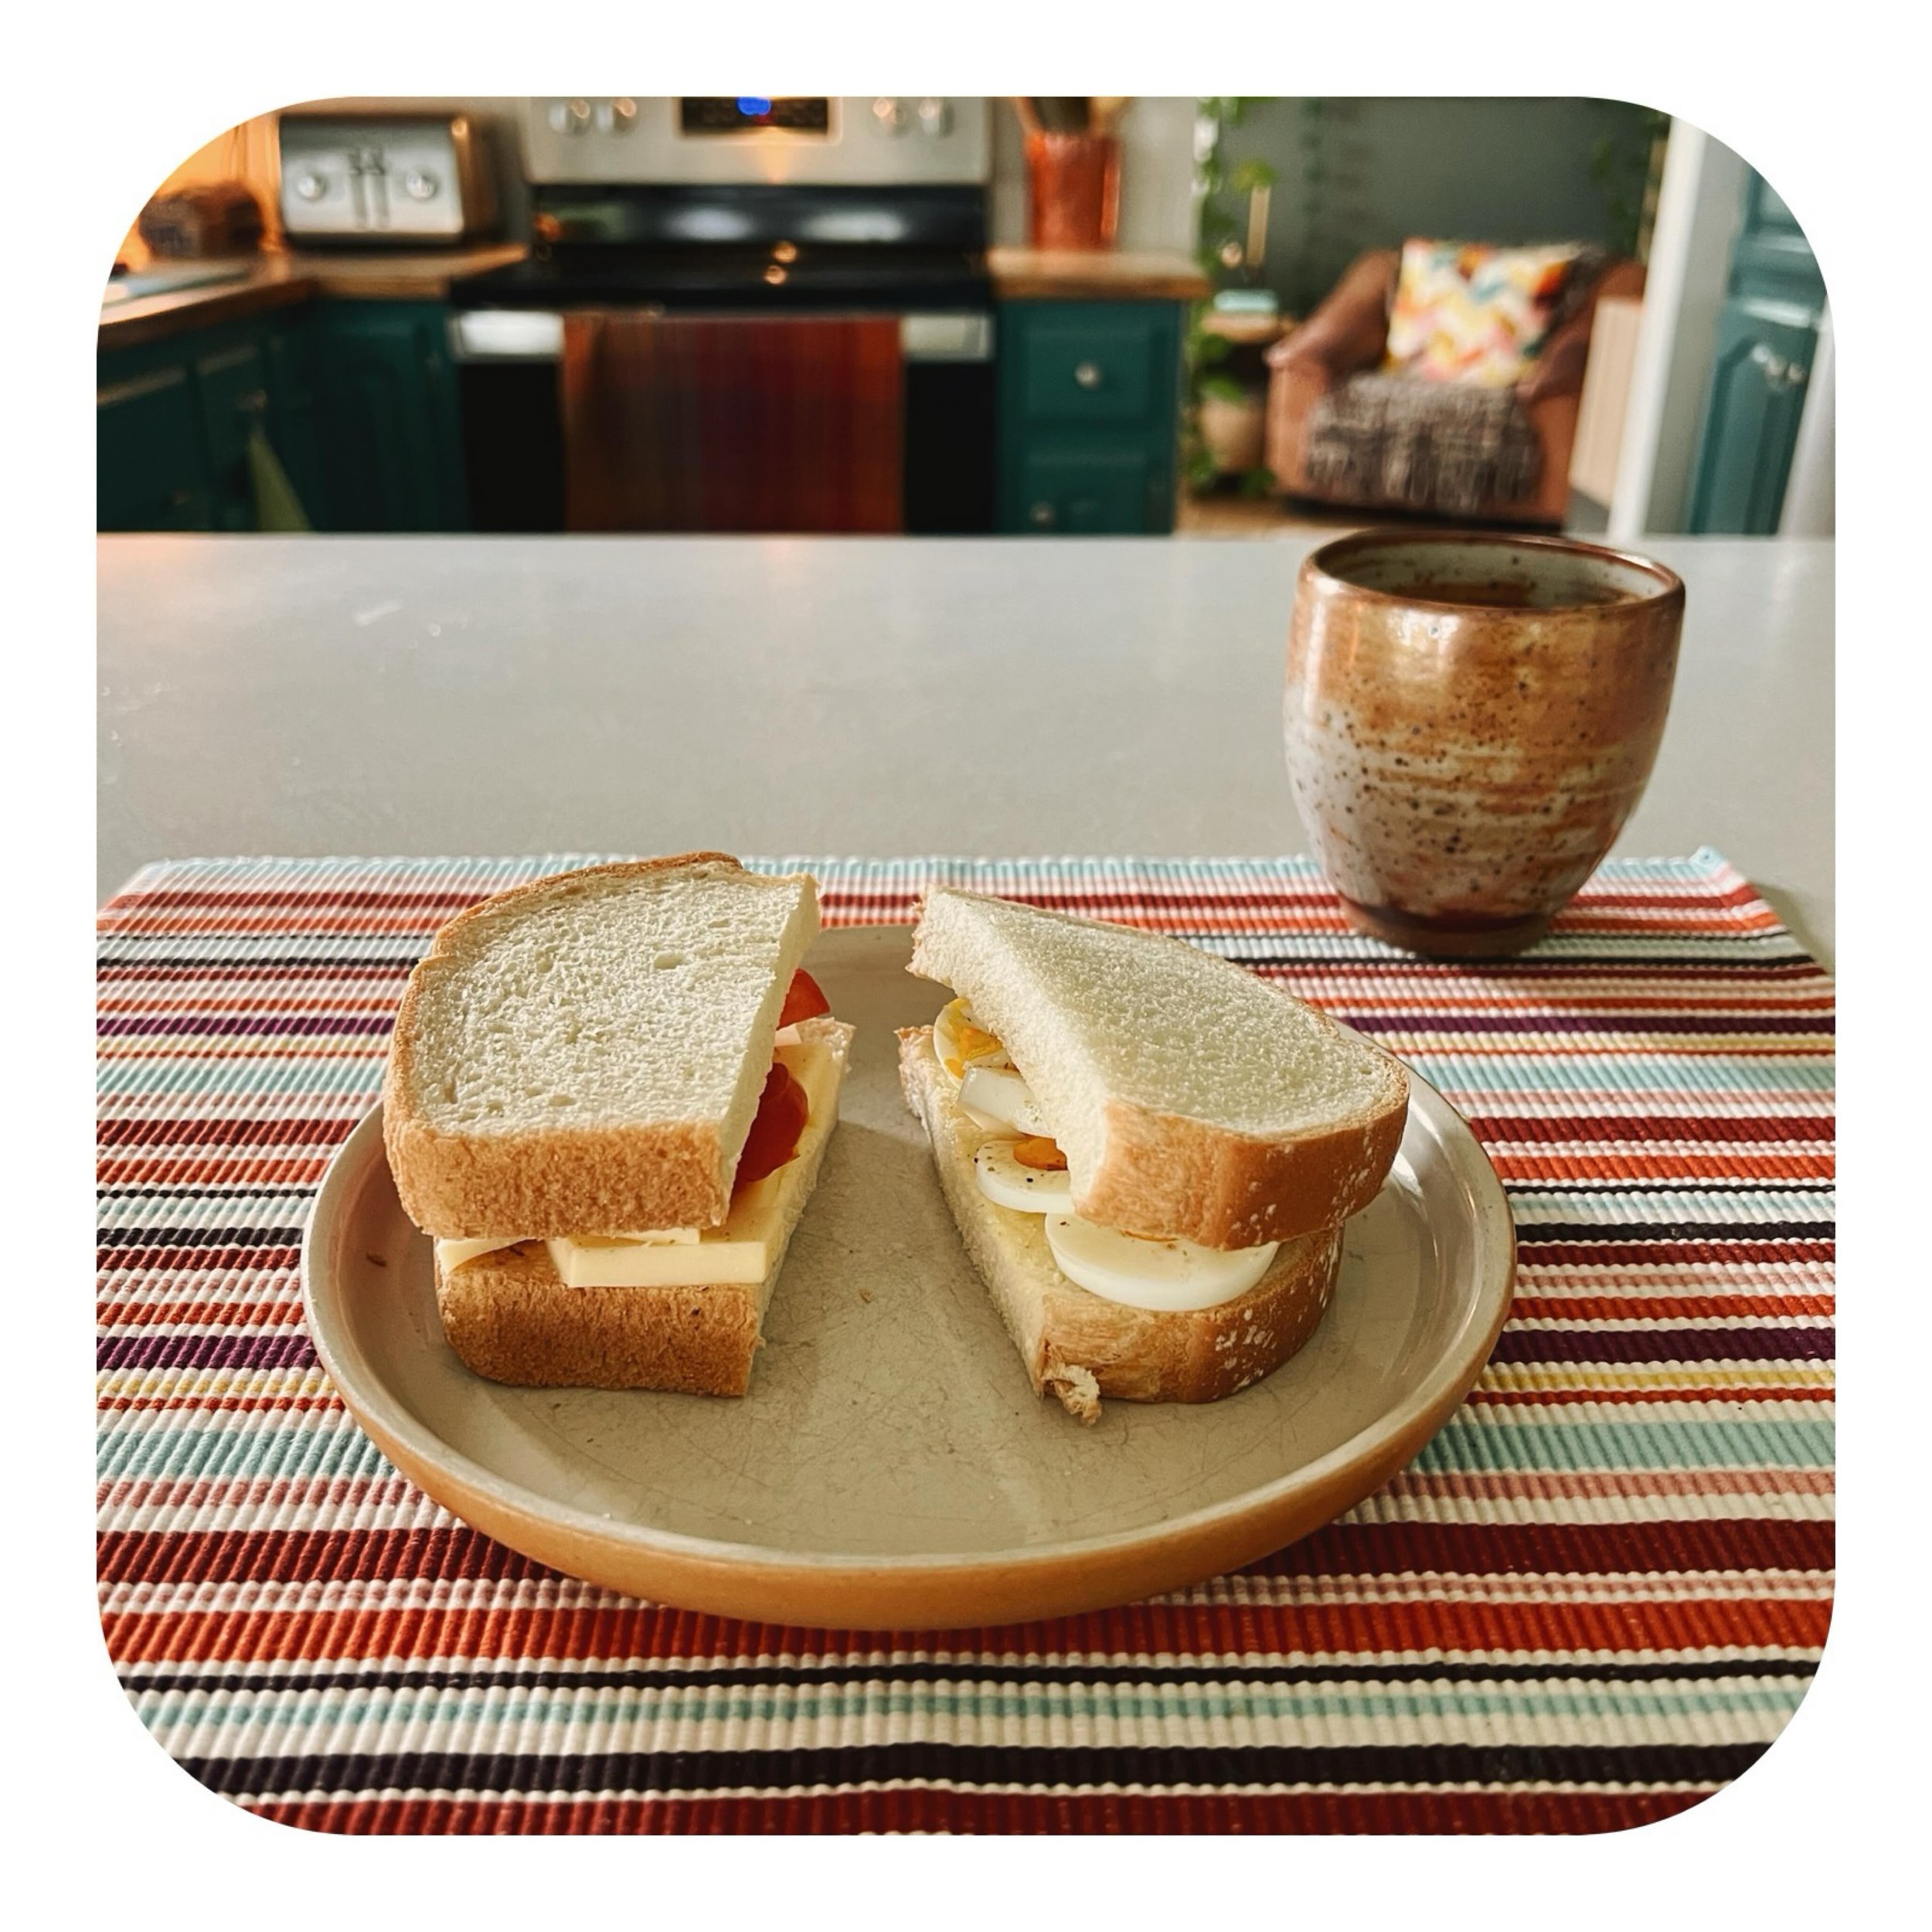 505 cals &bull; Breakfast: 2 slices Naked white bread, 28oz Gouda cheese, tomato and 1 boiled egg. 

When I grew up in Germany, white &lsquo;toast&rsquo; bread was only allowed as an occasional treat, wholewheat or rye bread was our staple. I remembe